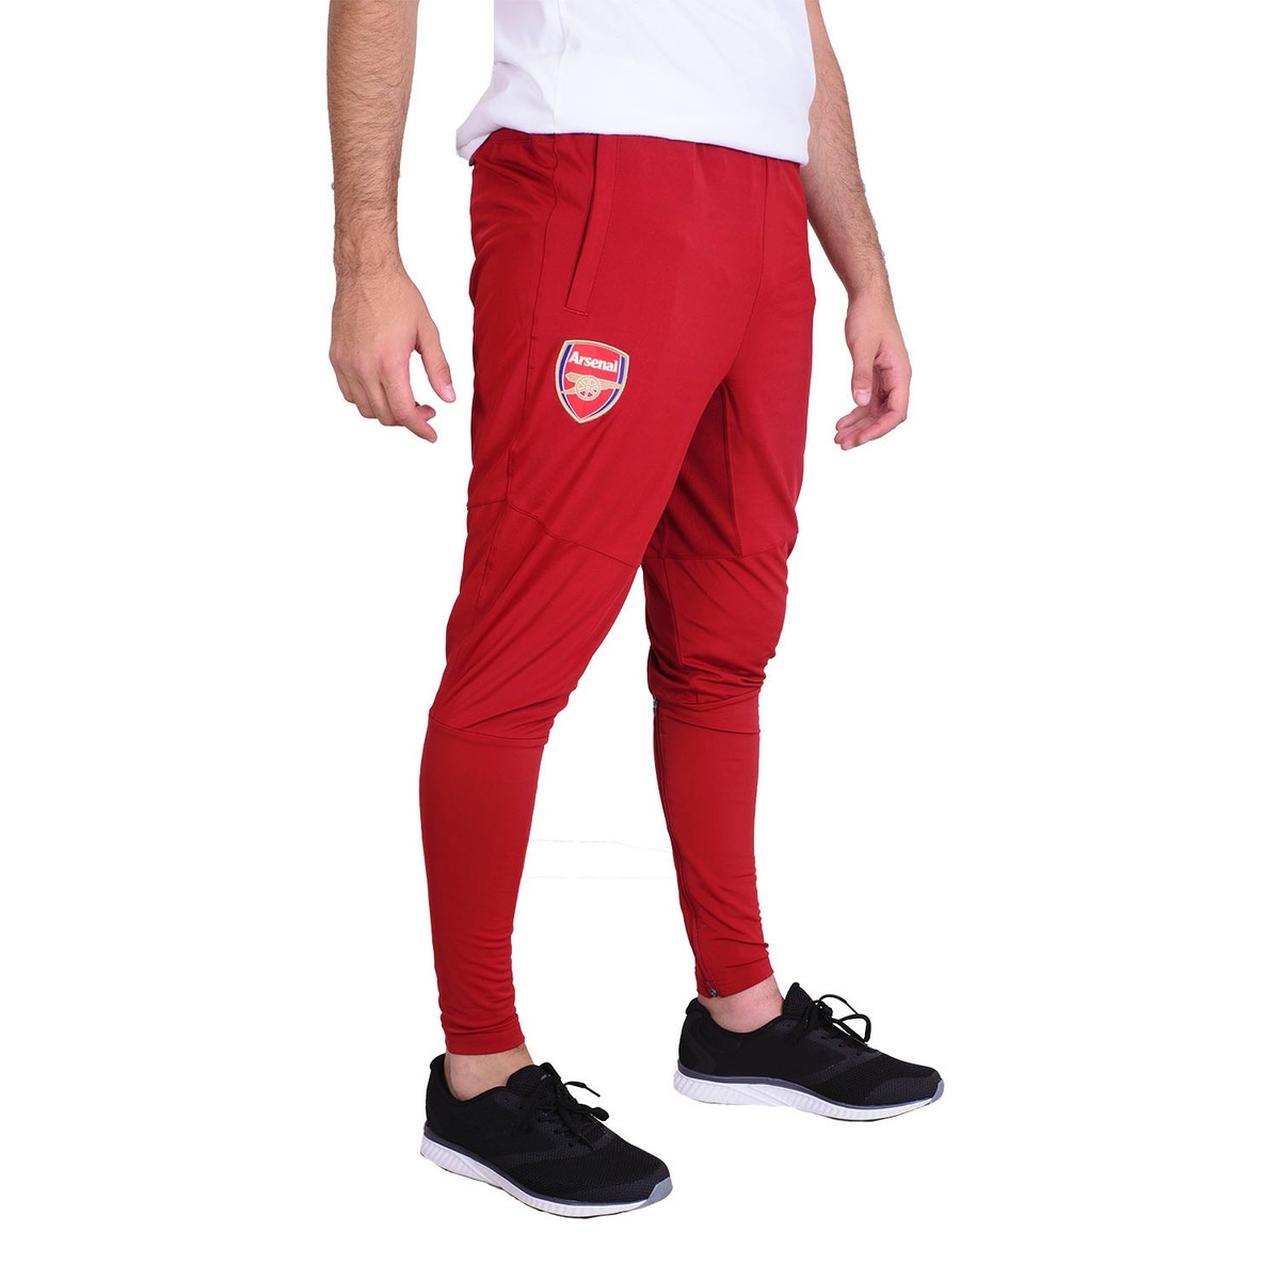 ⚽️ Arsenal Fitted Pants ⚽️ Red Puma Arsenal Fitted... Depop